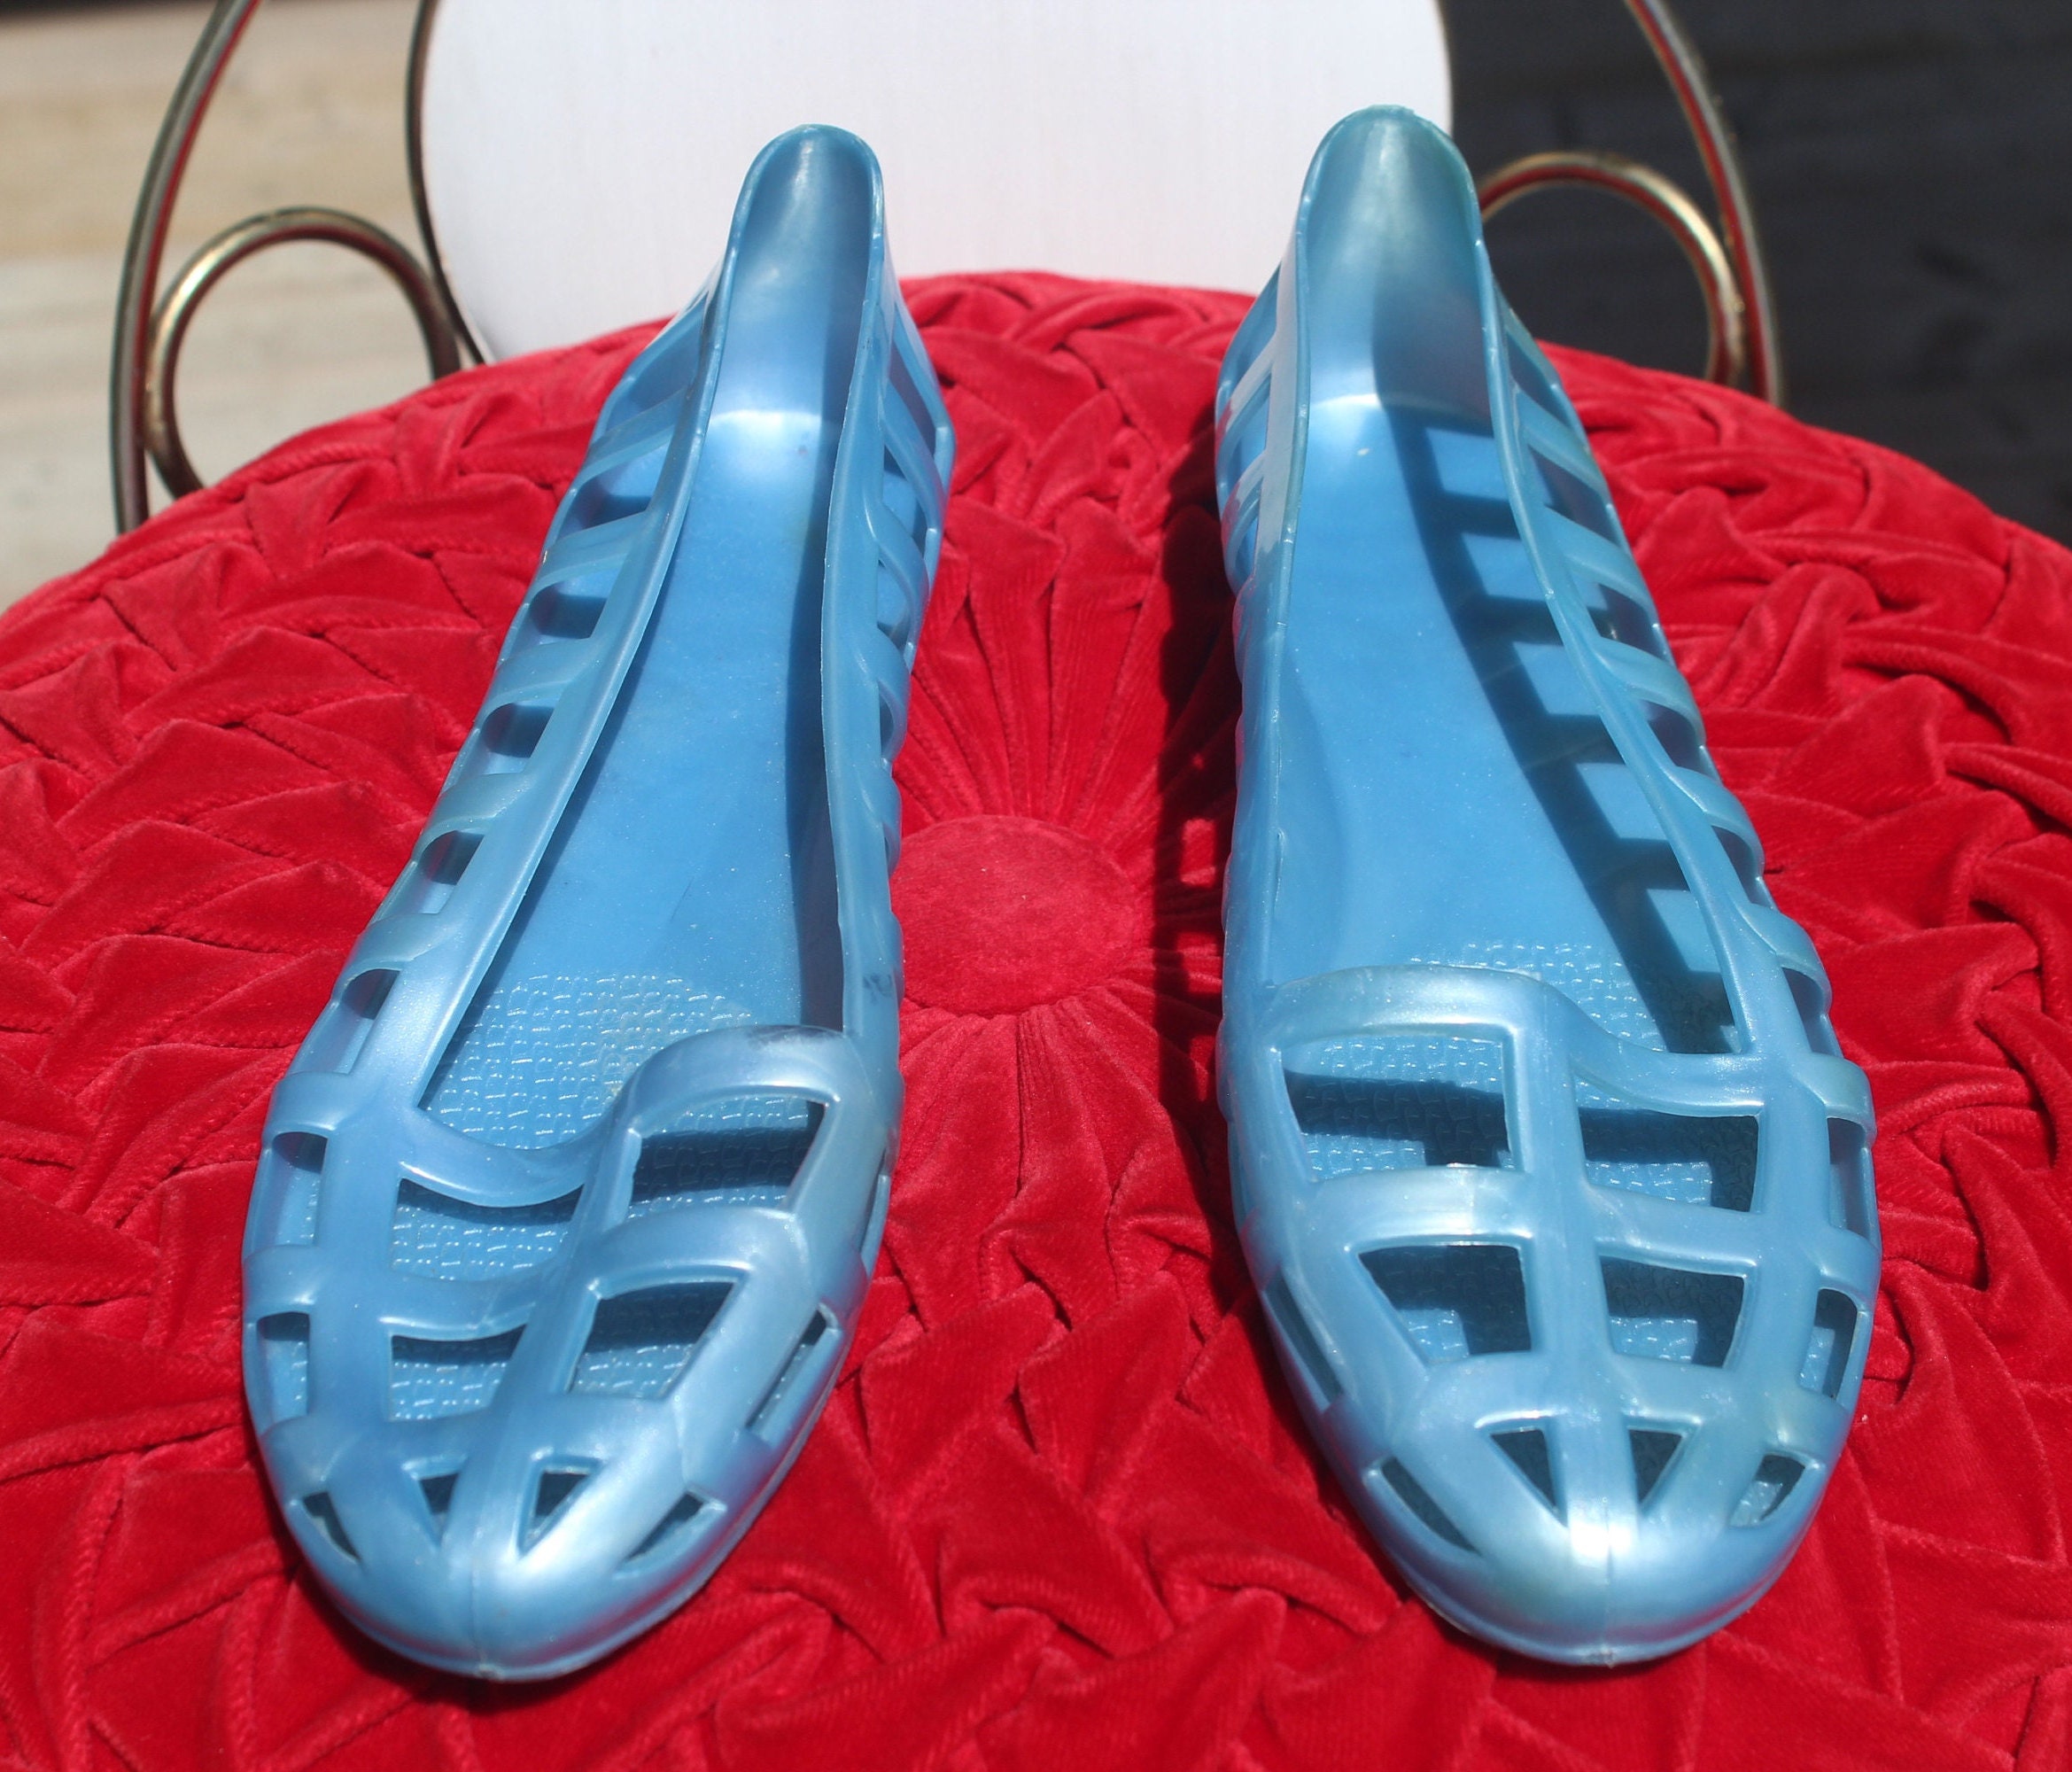 Buy 80s Vintage Bright Red Plastic Sandals. Jellies. Beach Shoes. Online in  India 